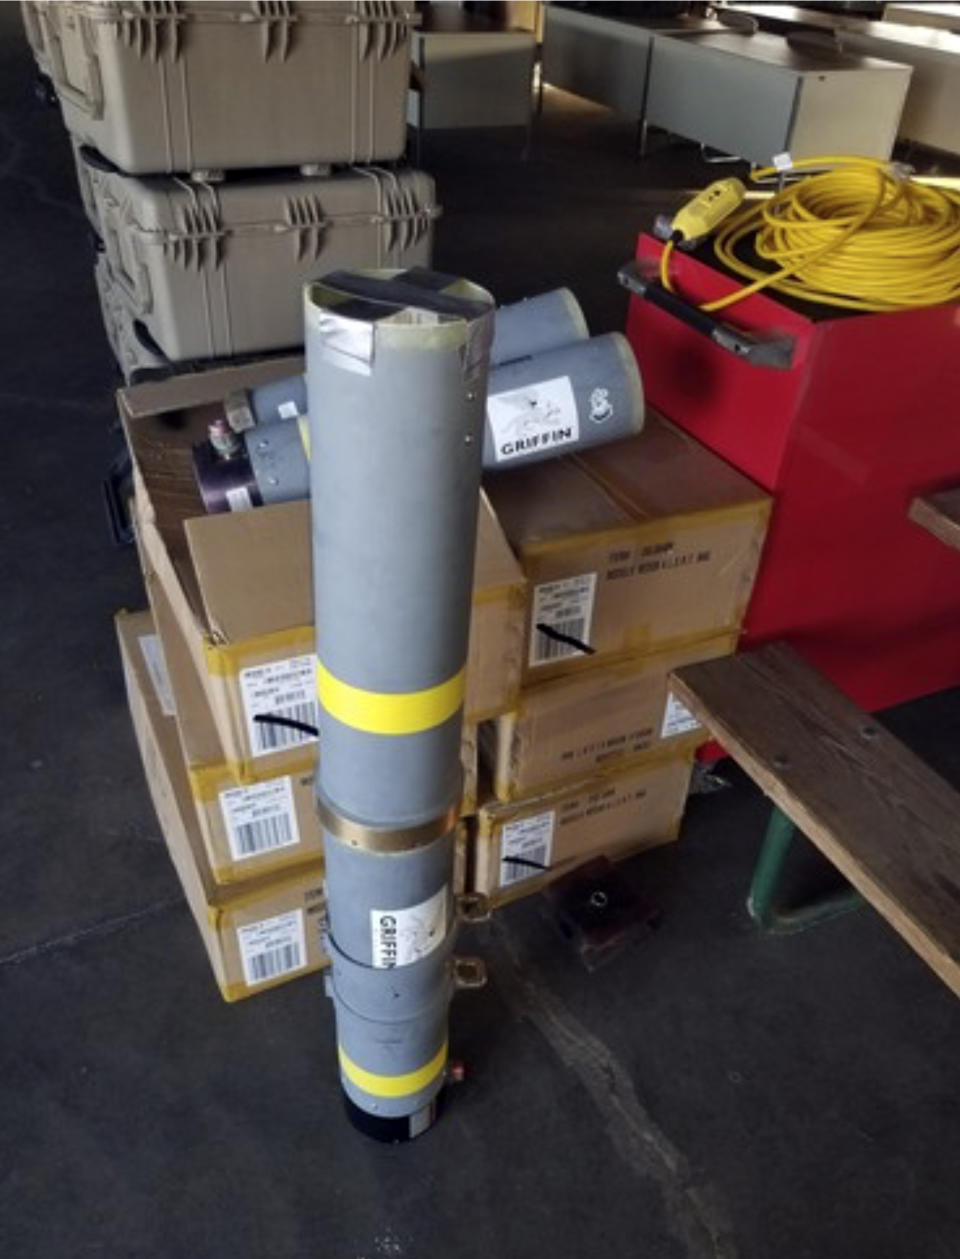 This image released by the Office of the State Fire Marshal's in Maryland, shows a rocket launcher tube that was seized at baggage area, Thursday, Aug. 1, 2019, at Baltimore/Washington International Thurgood Marshall Airport near Baltimore. The launch tube was brought back on a military flight by an Air Force sergeant as a souvenir from their service abroad. This is the second recovered rocket launcher military souvenir seized at the airport this week. (Office of the State Fire Marshal's via AP)